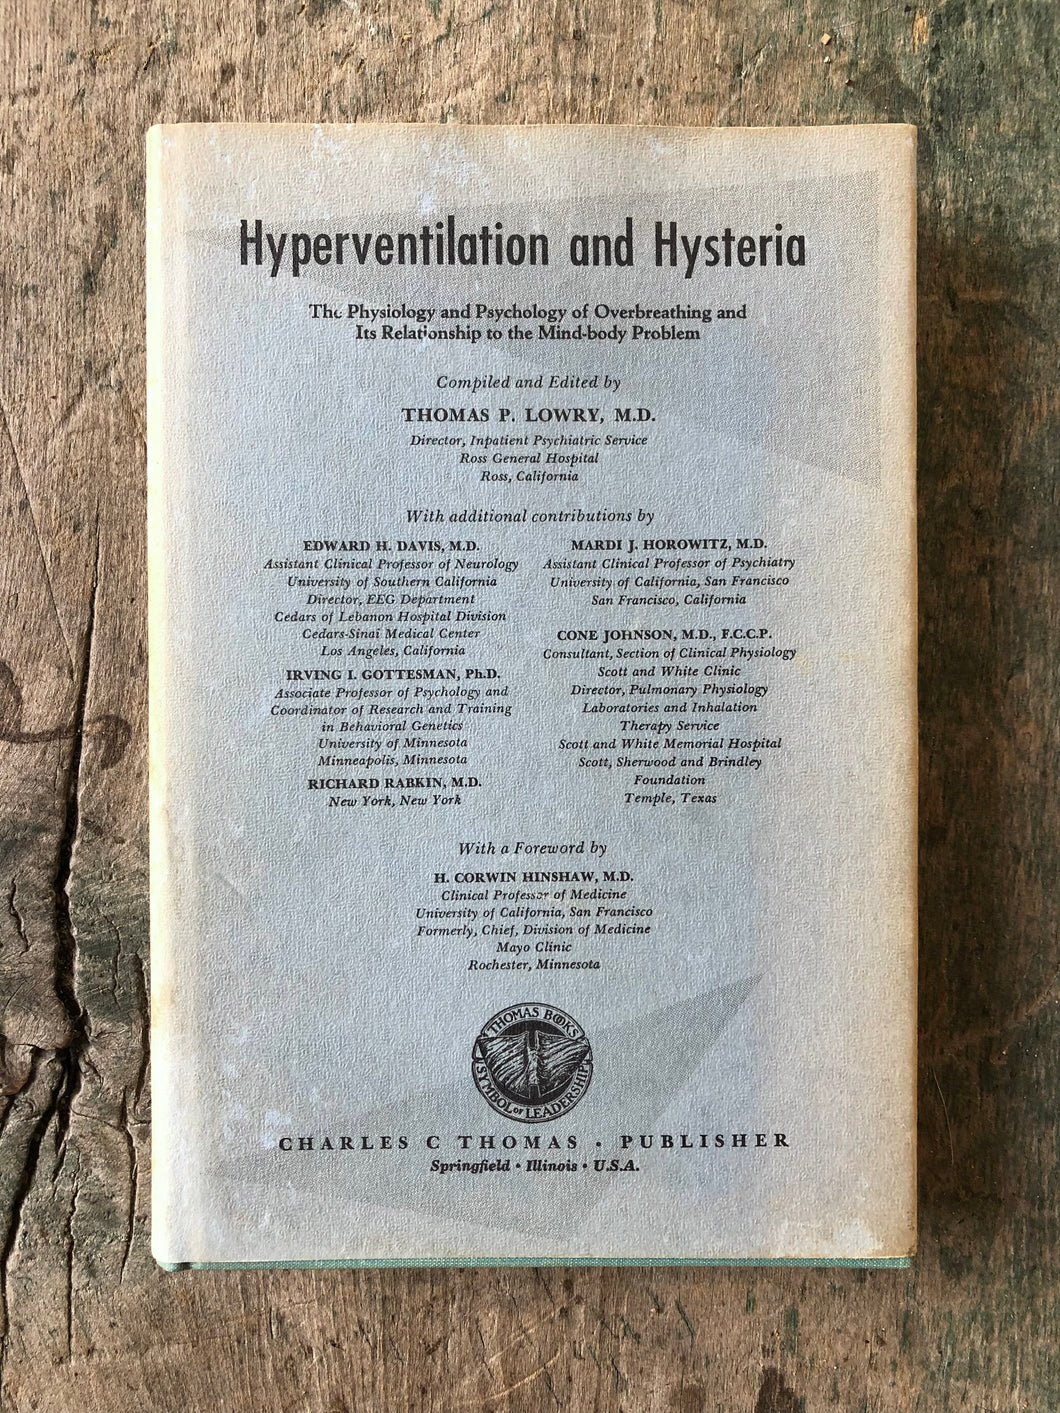 Hyperventilation and Hysteria: The Physiology and Psychology of Overbreathing and Its Relationship to the Mind-body Problem by Thomas P. Lowry